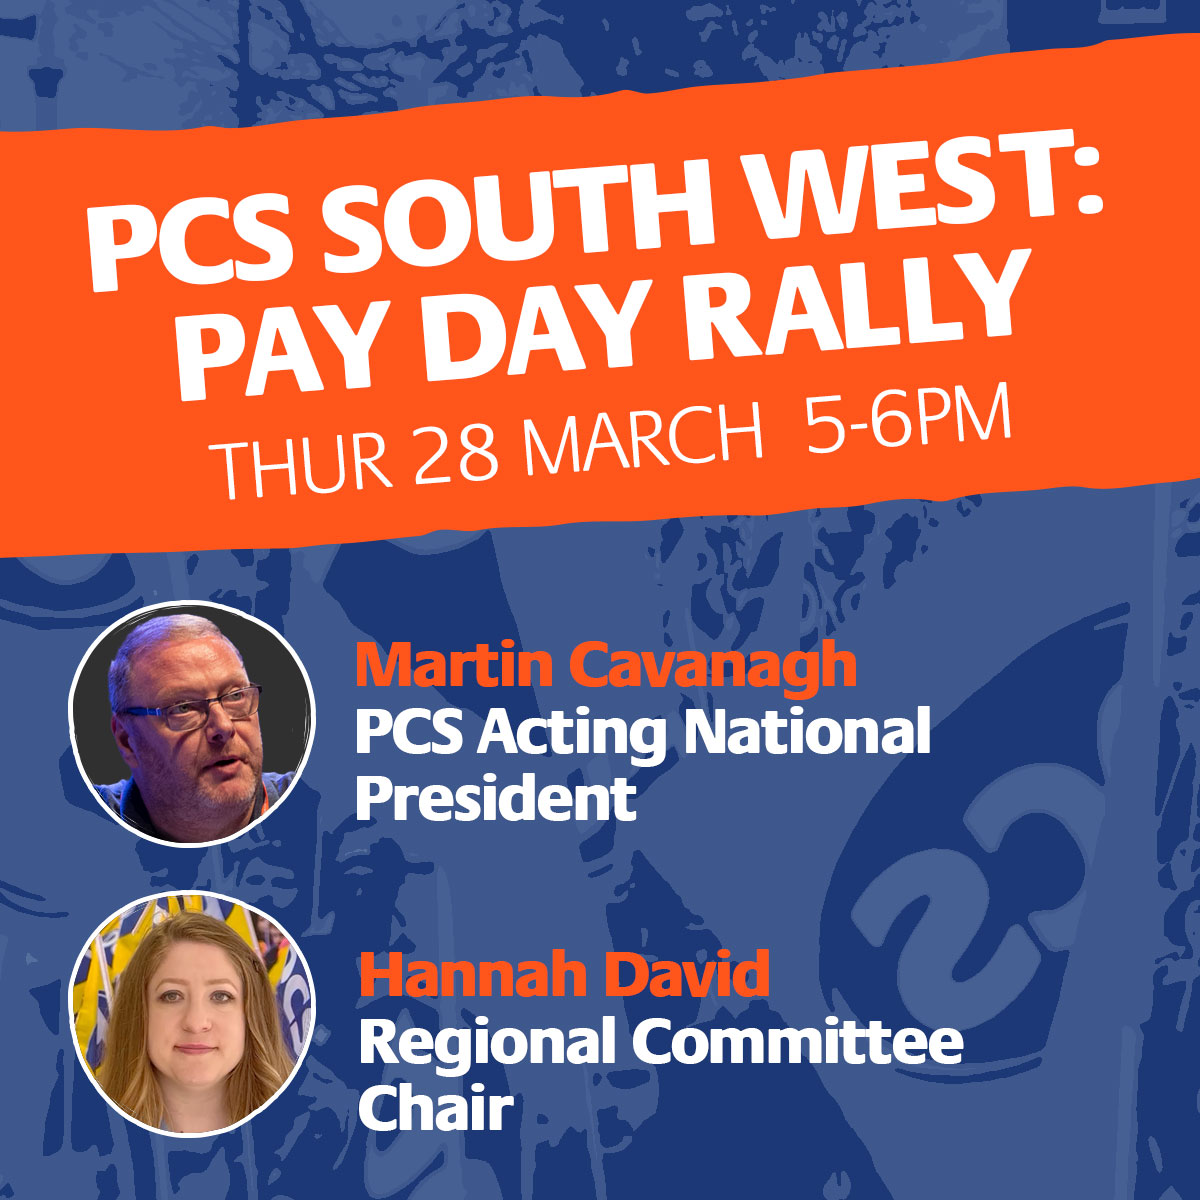 Following the launch of our national strike ballot, PCS South West is hosting an online payday rally. All members are encouraged to join. For more information and registration see here: pcs.org.uk/news-events/ev… #PCS